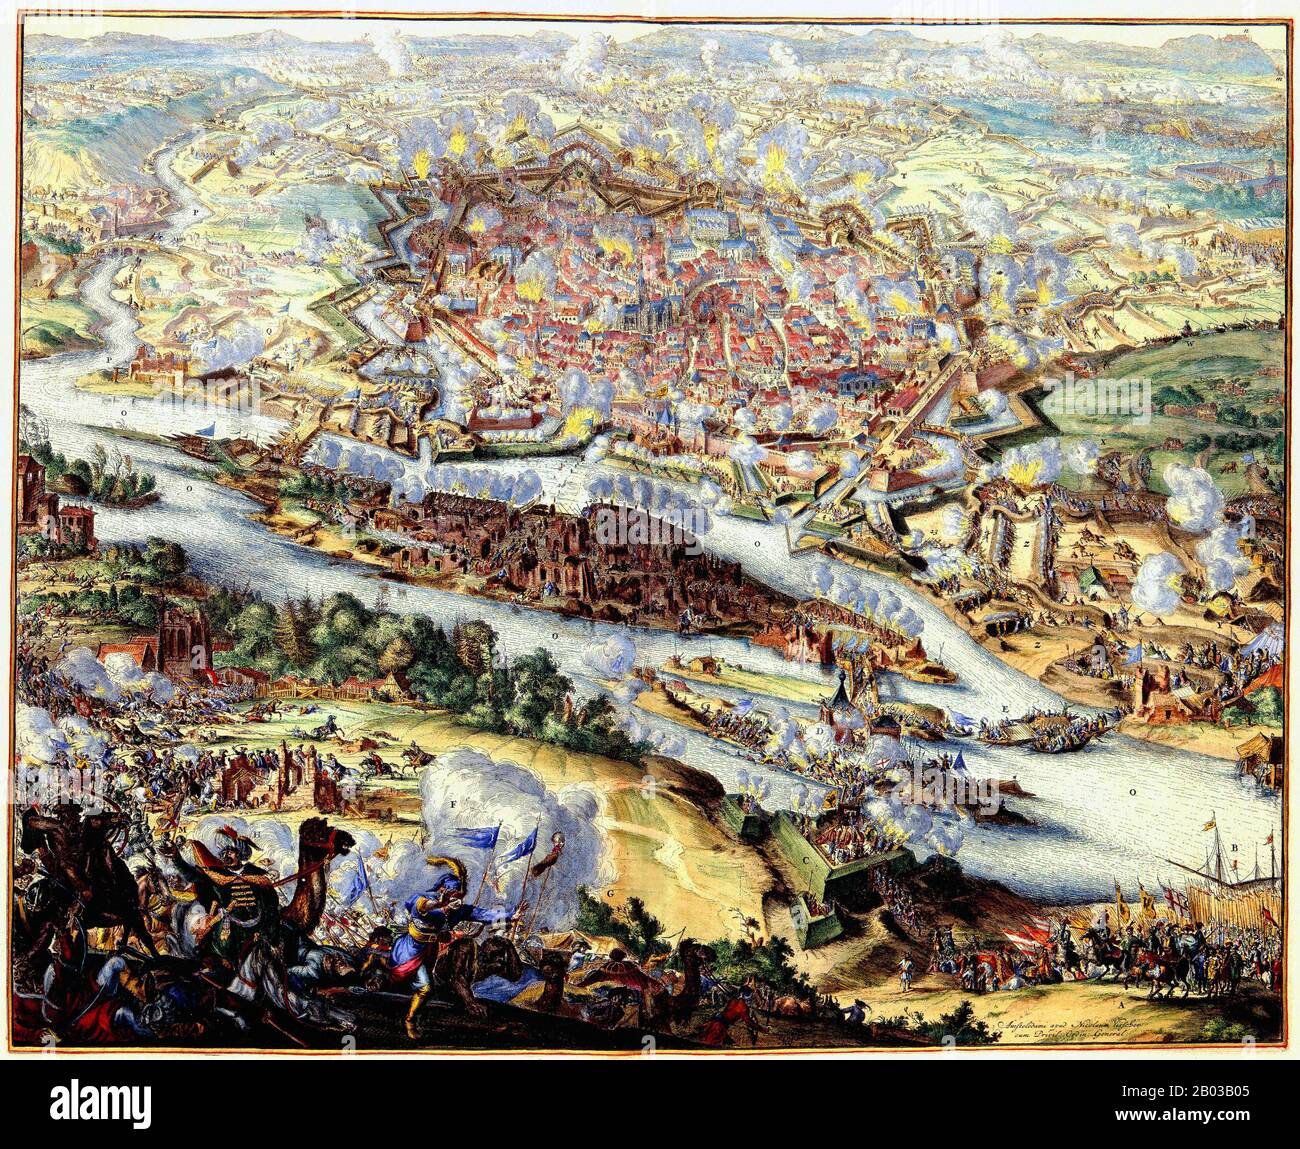 The Battle of Vienna took place at Kahlenberg Mountain near Vienna on 12 September 1683 after the imperial city had been besieged by the Ottoman Empire for two months. Stock Photo